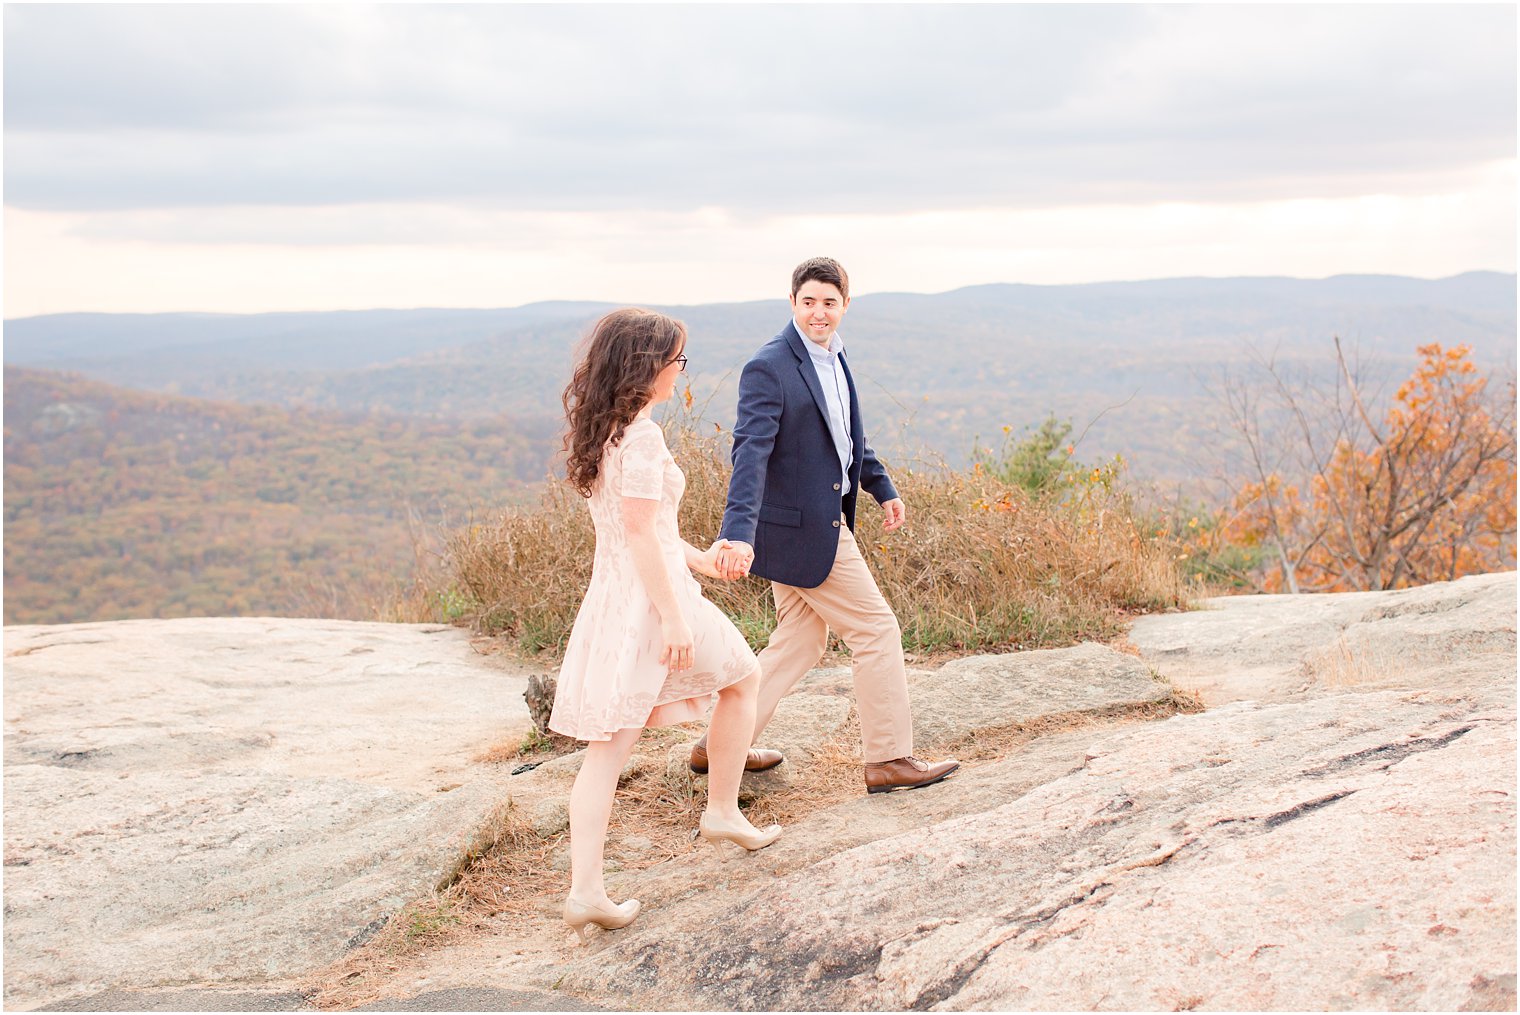 Groom leading bride for engagement photos